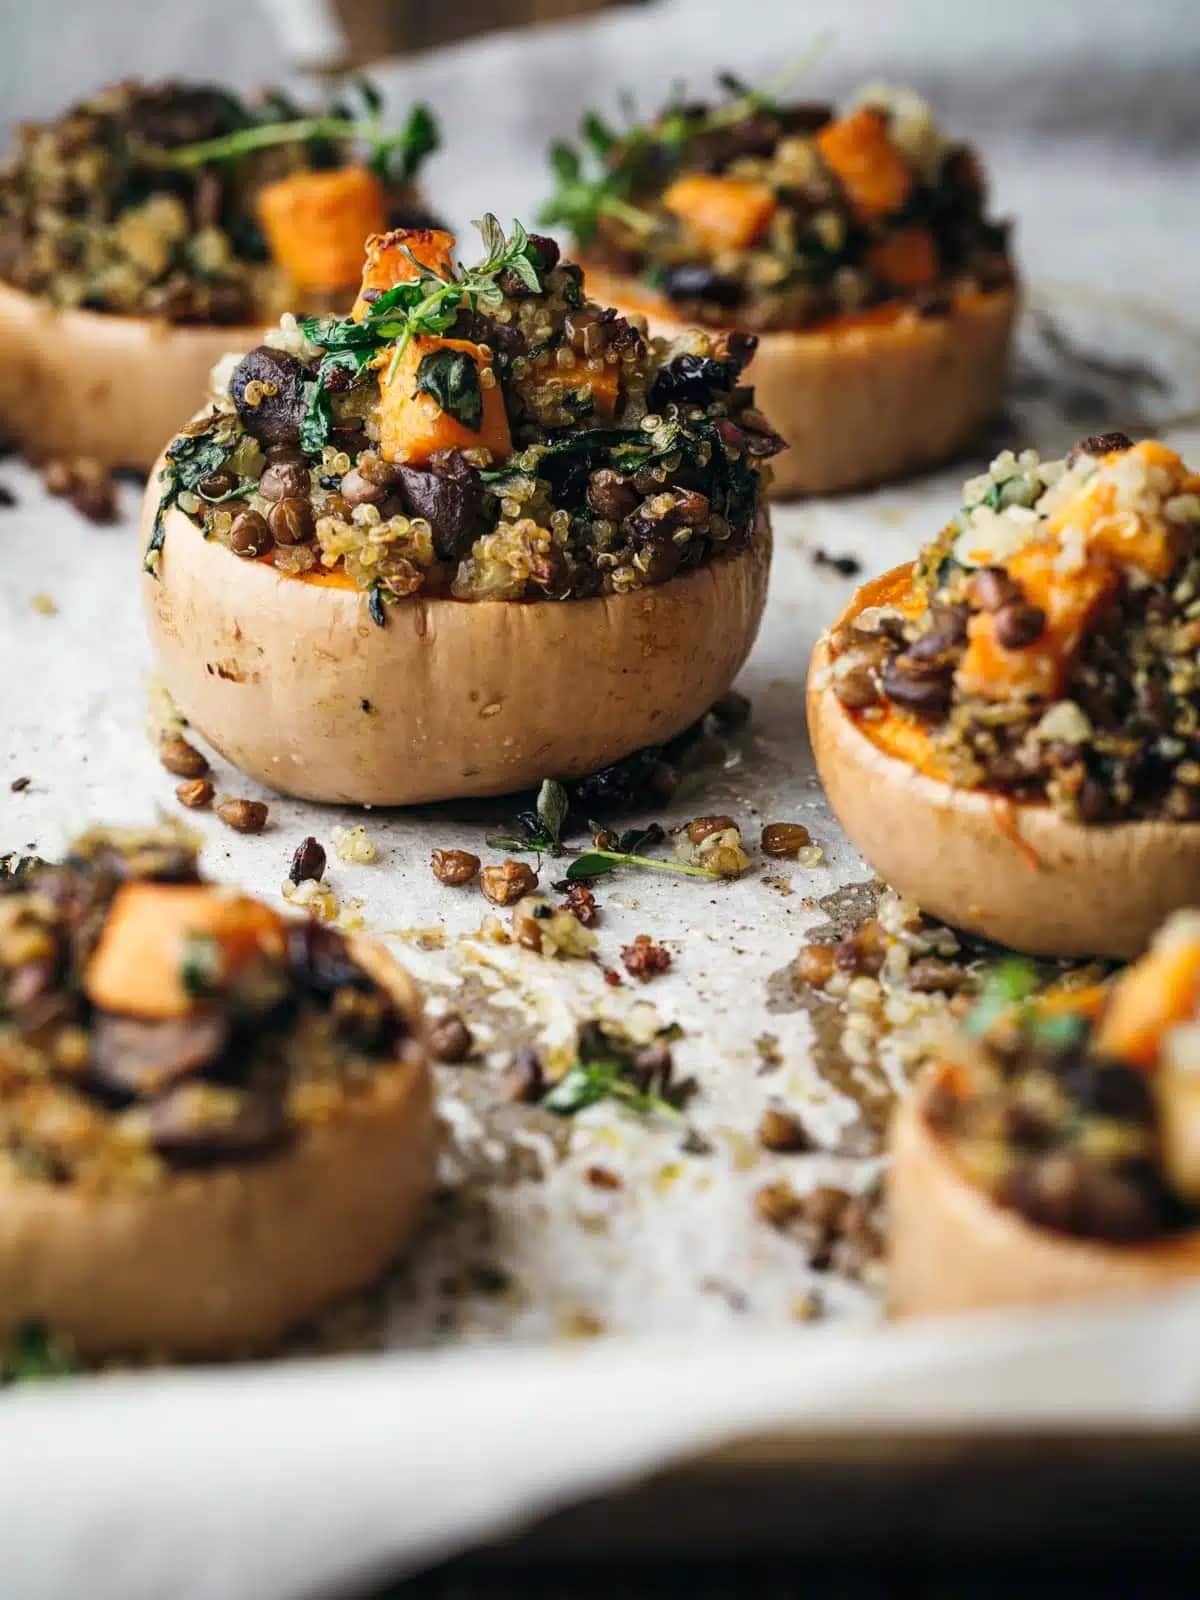 Butternut squash stuffed with hestnuts (for a meaty texture), cranberries, and fragrant herbs. 